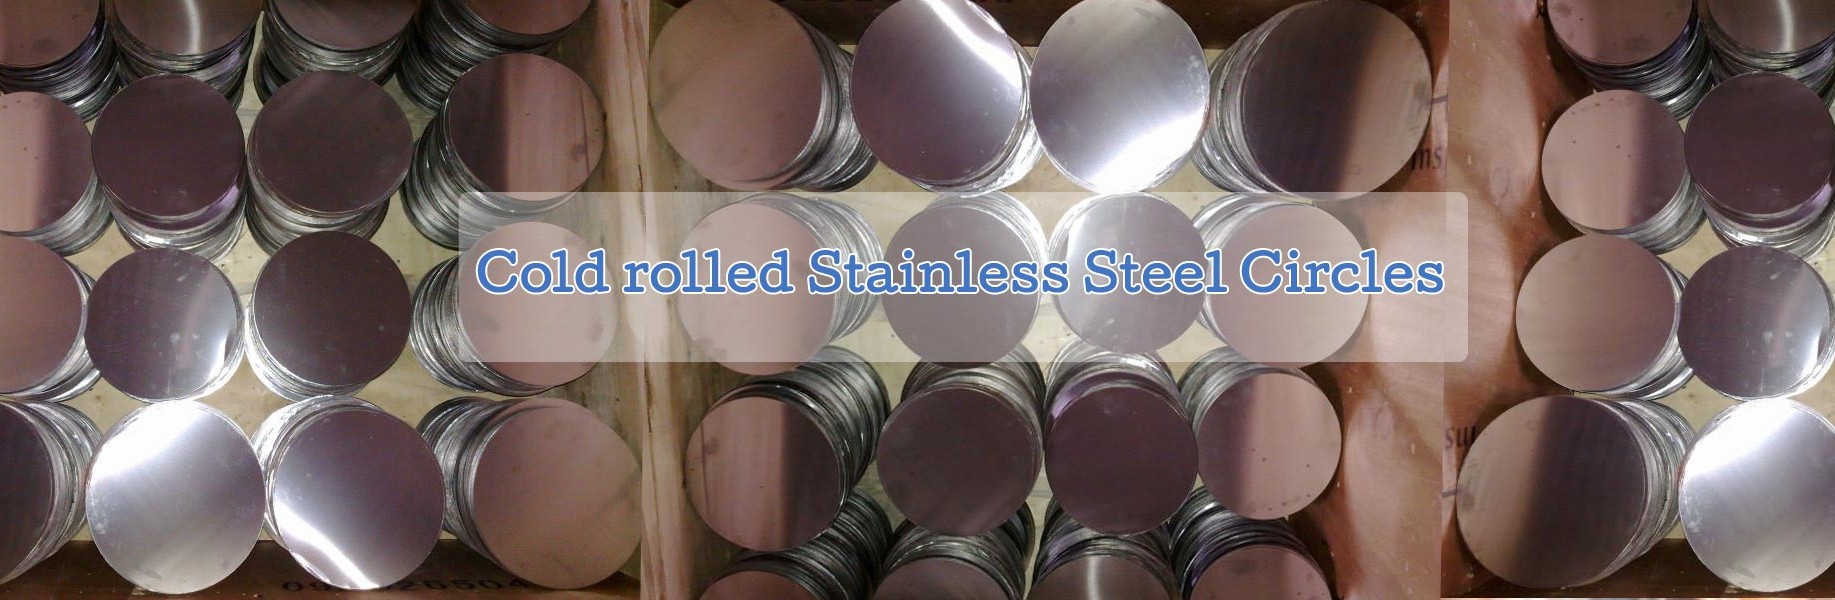 COLD ROLLED STAINLESS STEEL CIRCLES